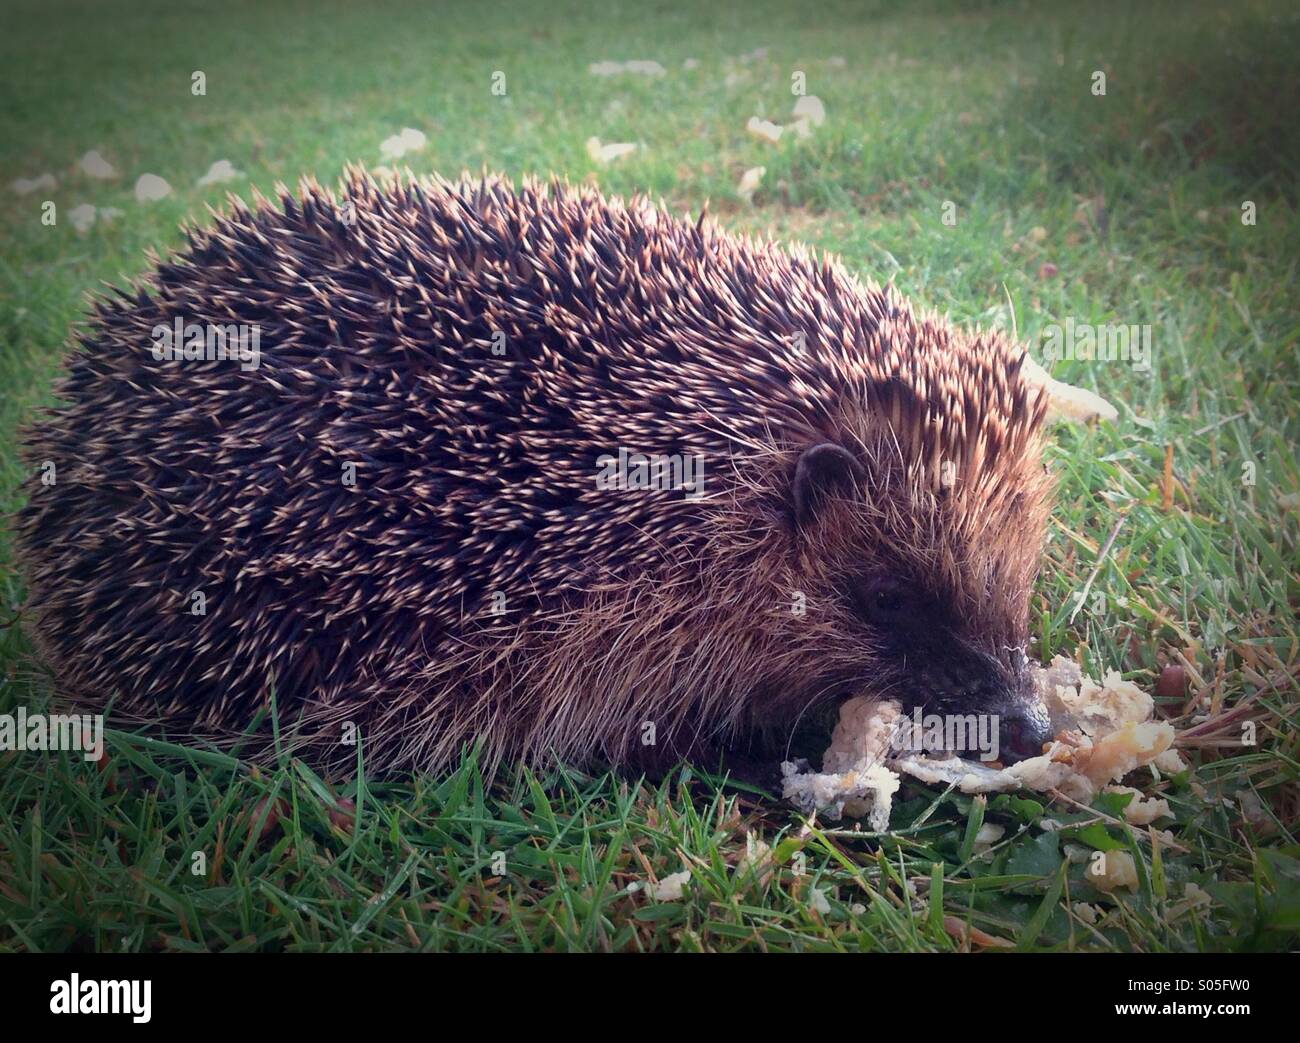 A hedgehog eats scraps of food on the lawn of an English garden. Stock Photo